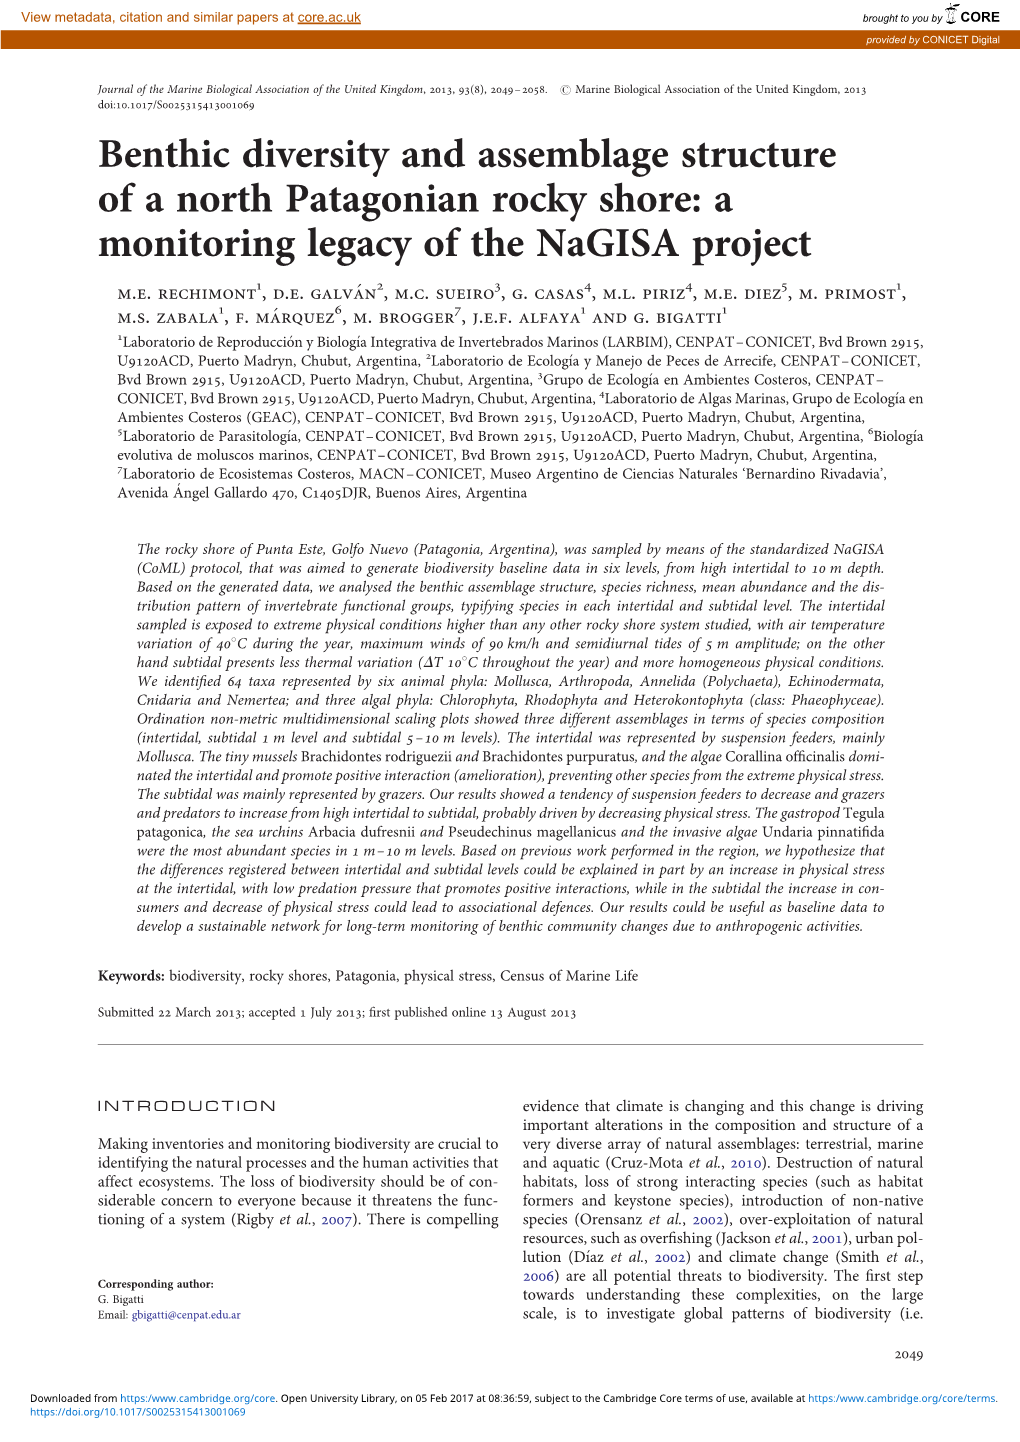 Benthic Diversity and Assemblage Structure of a North Patagonian Rocky Shore: a Monitoring Legacy of the Nagisa Project M.E